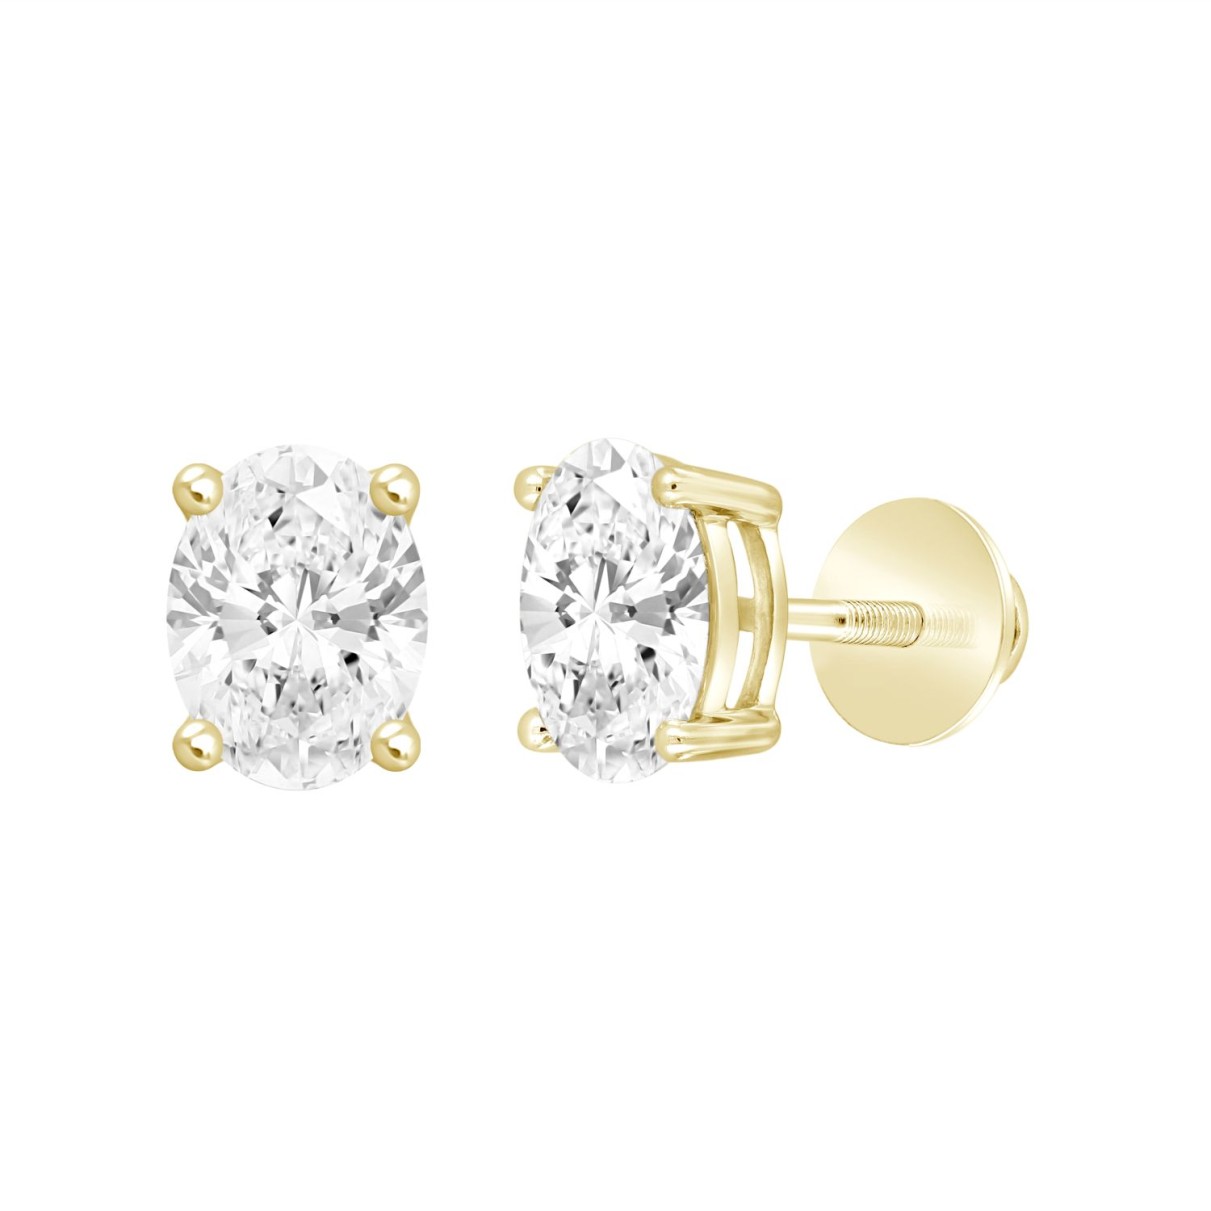 LADIES SOLITAIRE EARRINGS  2CT OVAL DIAMOND 14K YELLOW GOLD